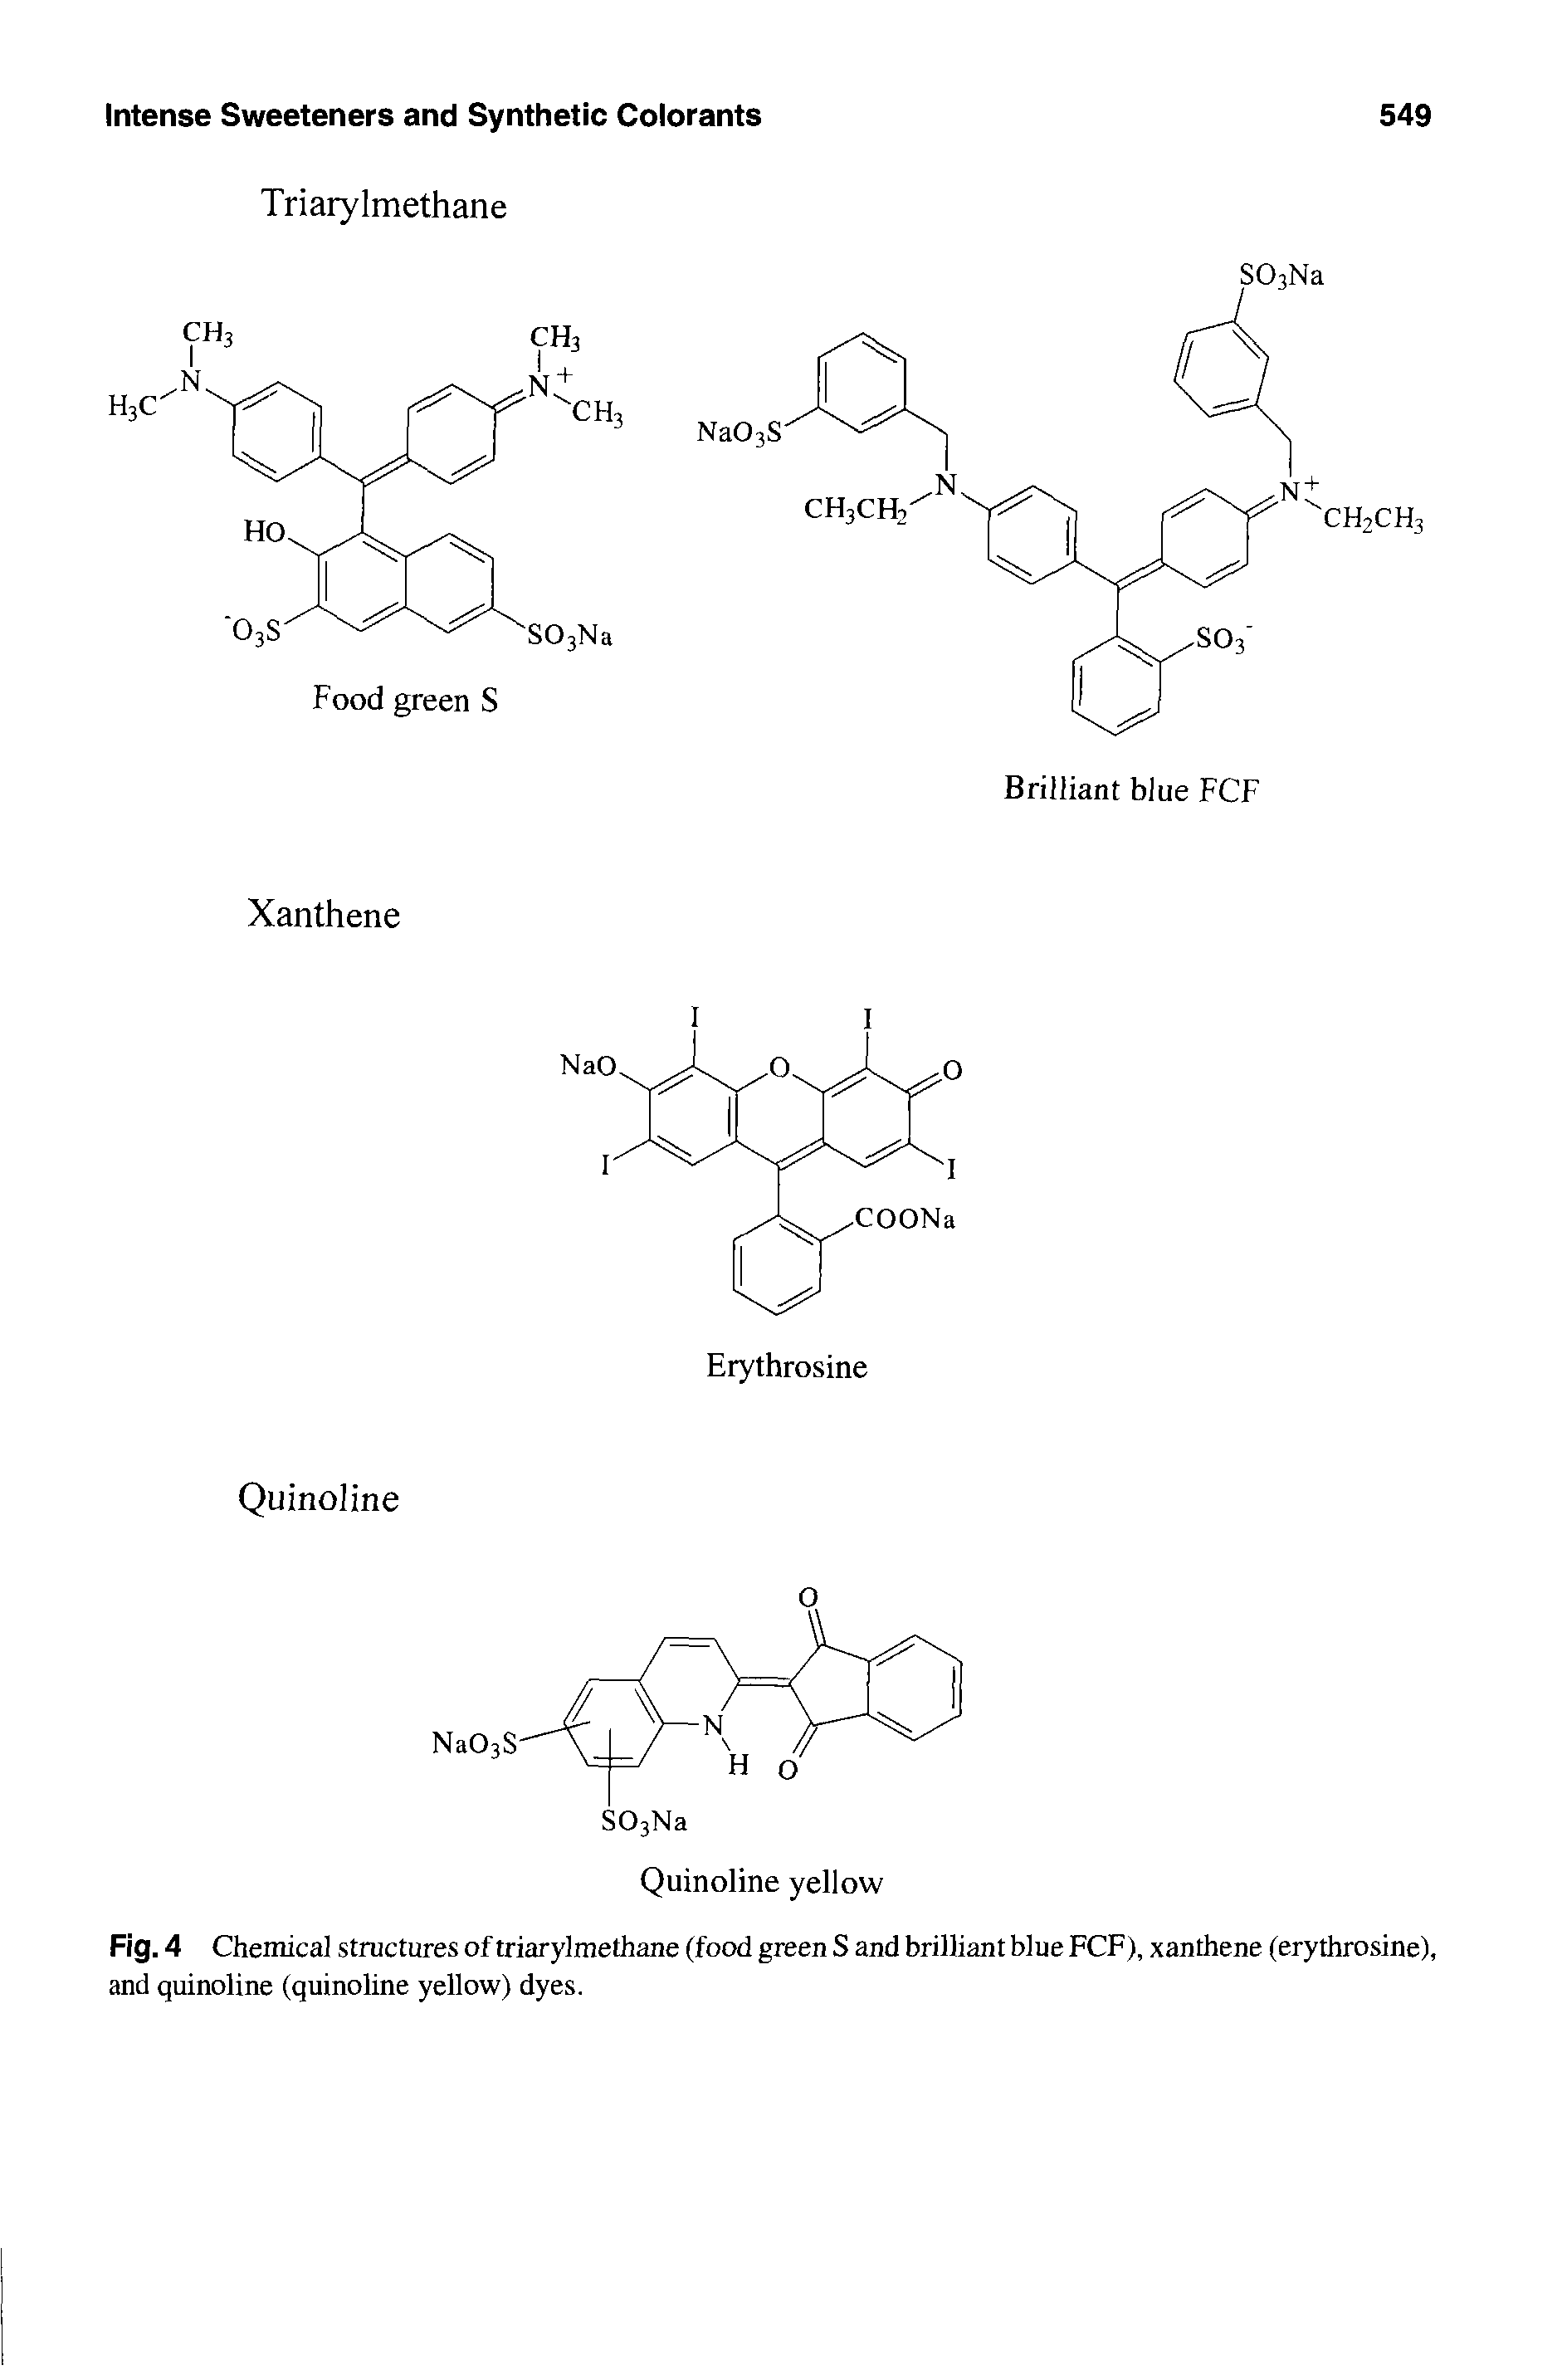 Fig. 4 Chemical structures of triarylmethane (food green S and brilliant blue FCF), xanthene (erythrosine), and quinoline (quinoline yellow) dyes.